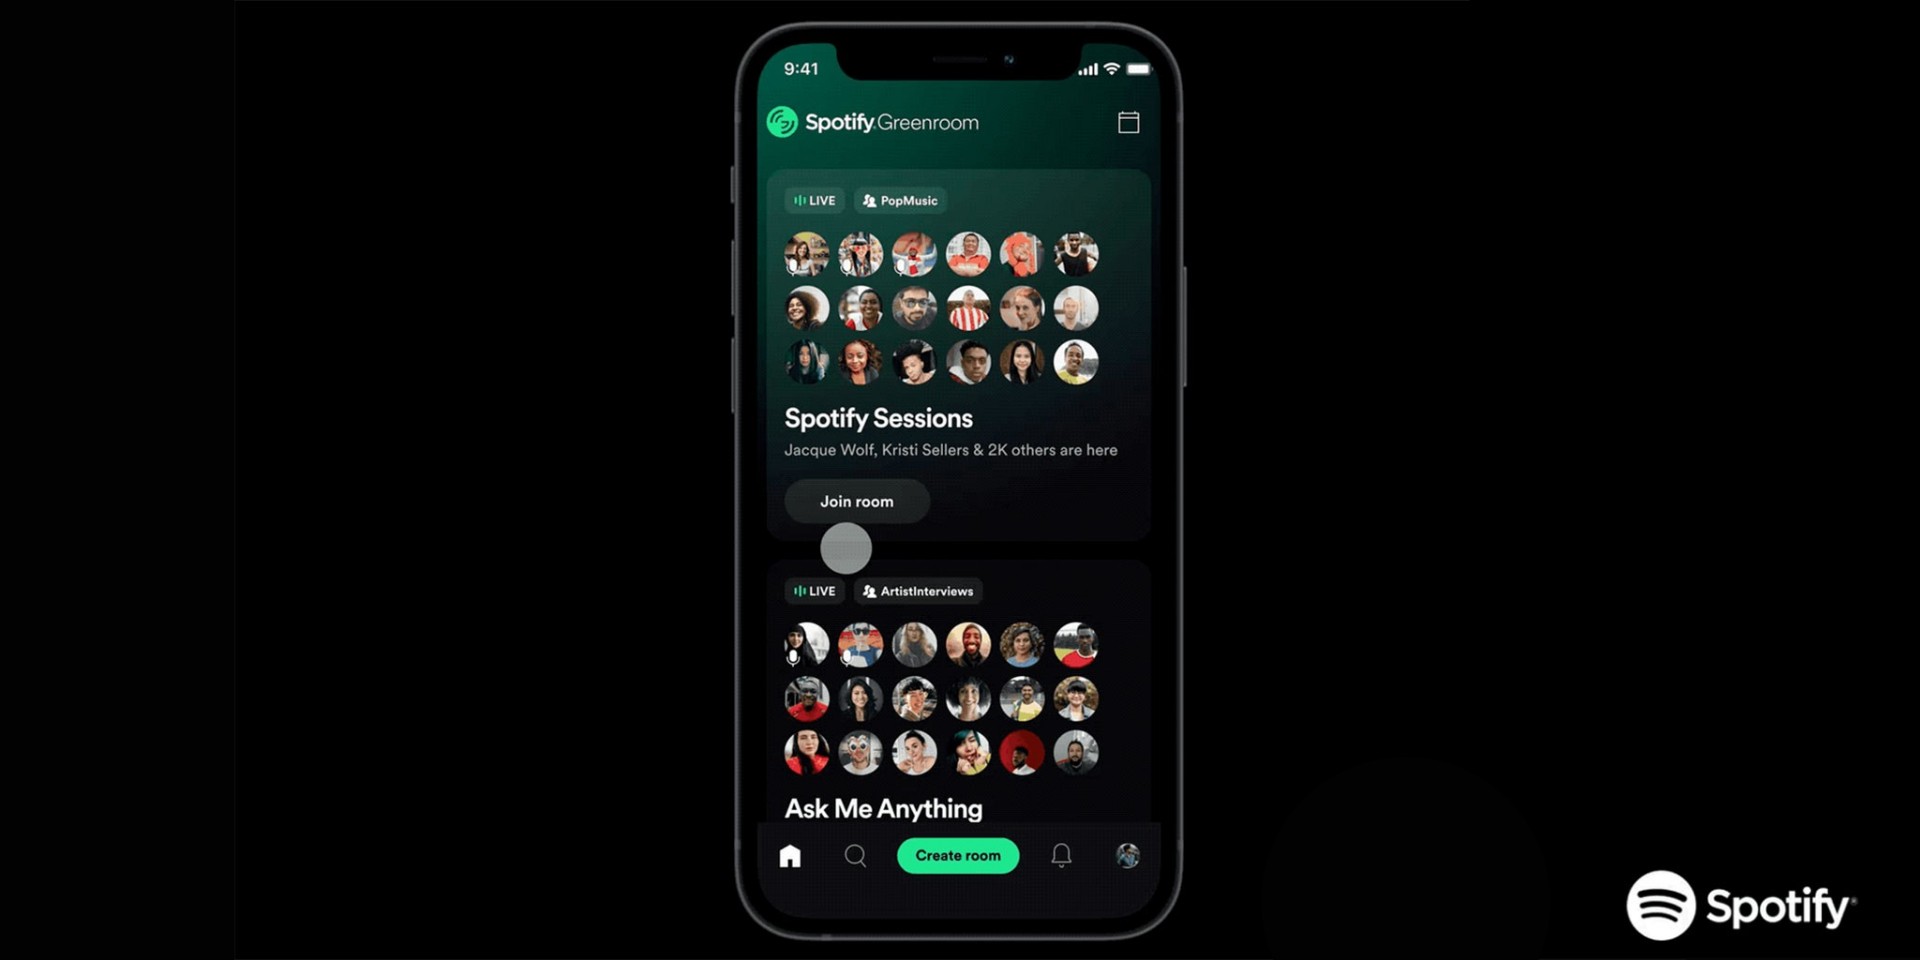 Spotify just launched a new live social audio app 'Greenroom', here's what you need to know